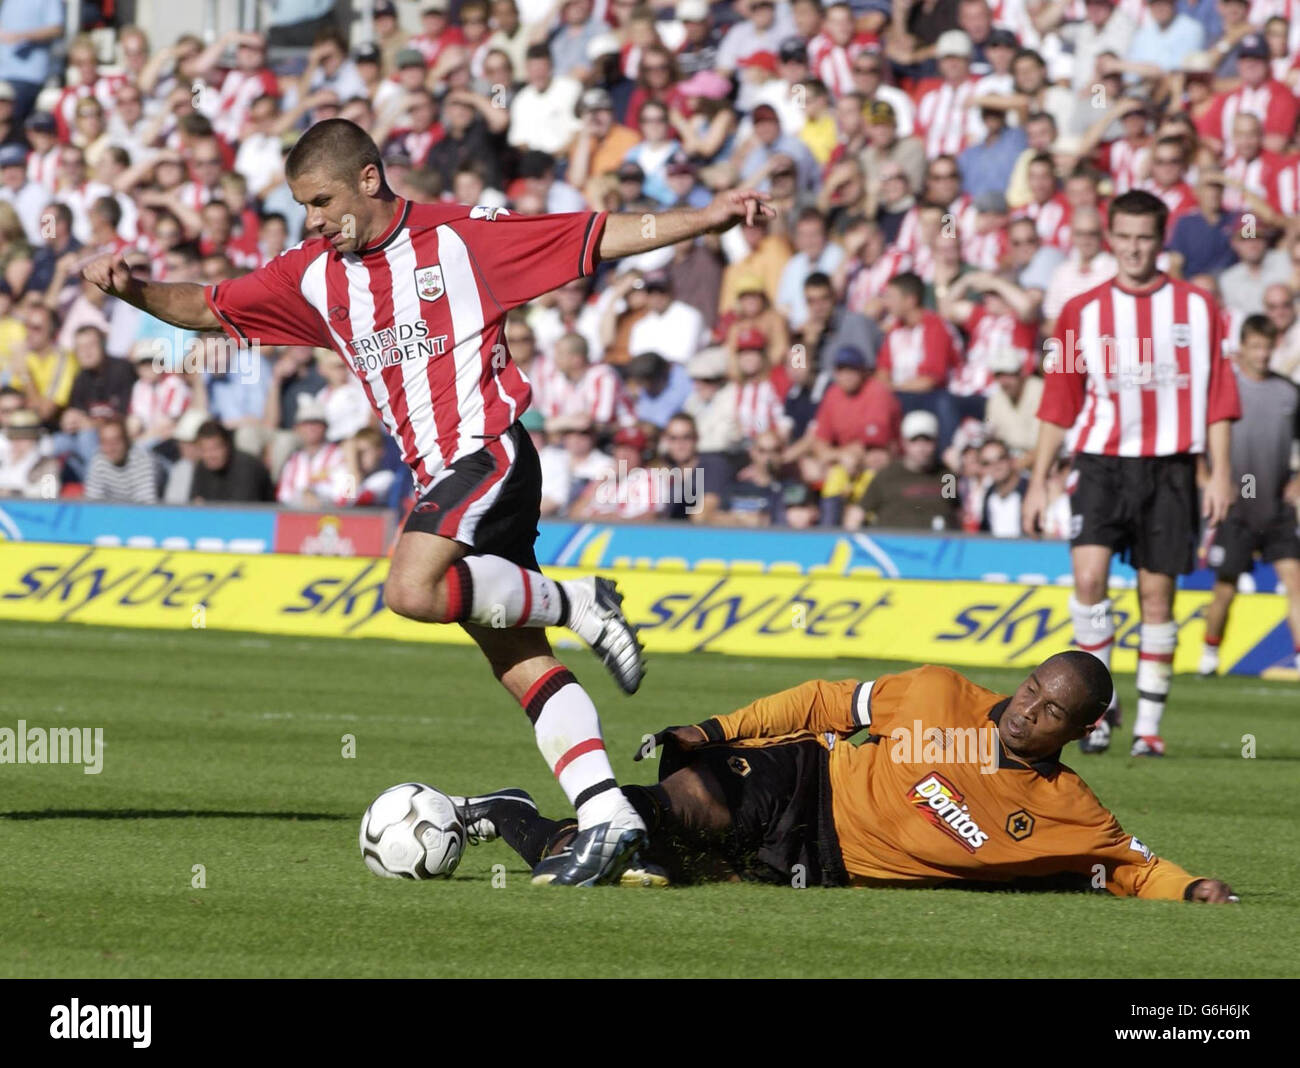 Southamptons Kevin Phillips (right) trips past Wolverhamptons Paul Ince, during their FA Barclaycard Premiership match at St Mary's Stadium, Southampton. Stock Photo